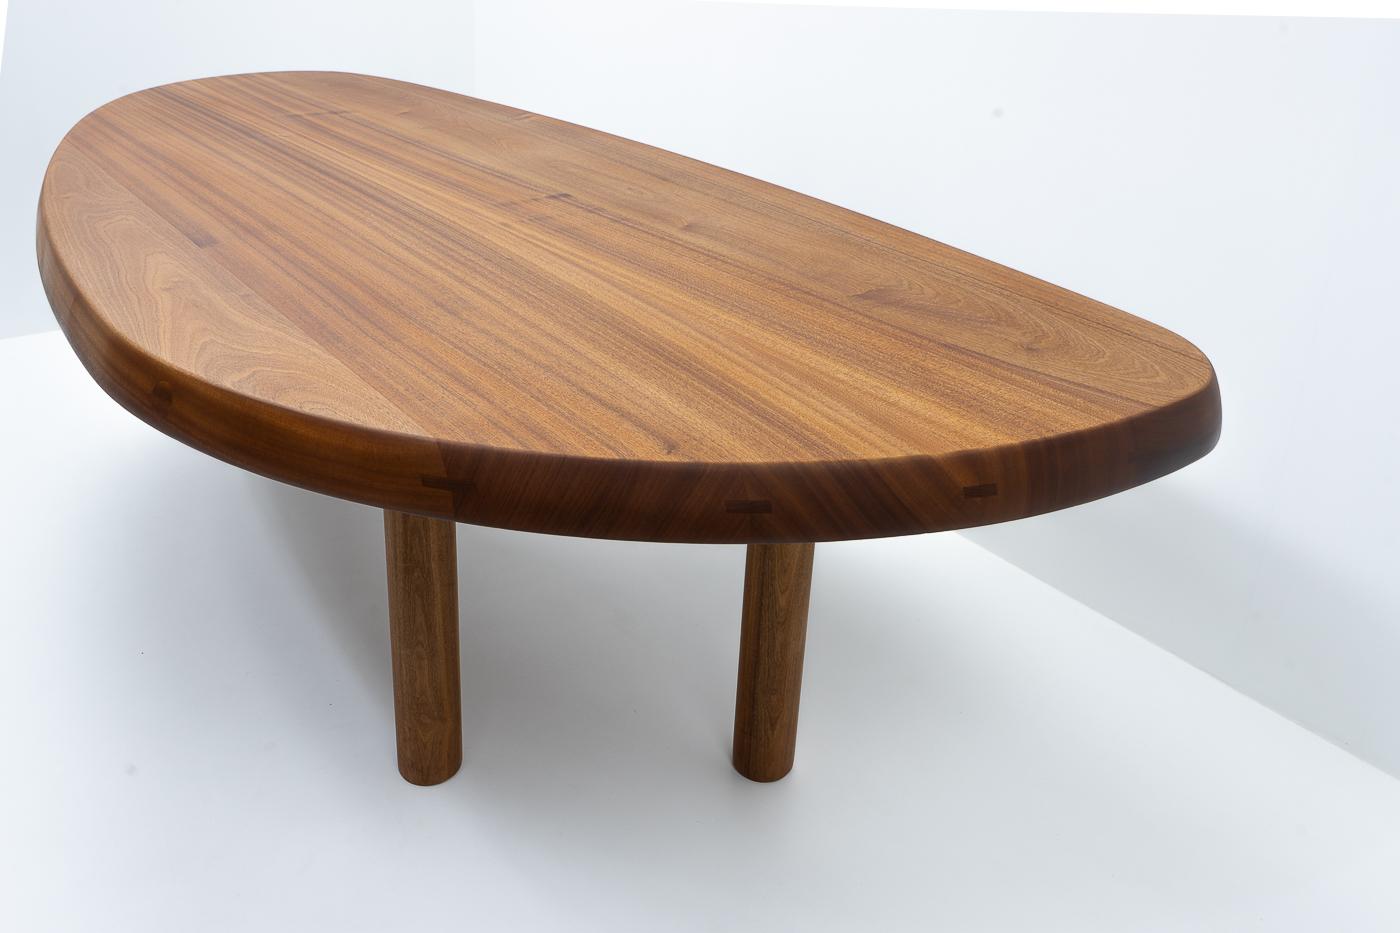 Bentwood Modernist Design Free Form Dining Table by Charlotte Perriand, Cassina, 2000s